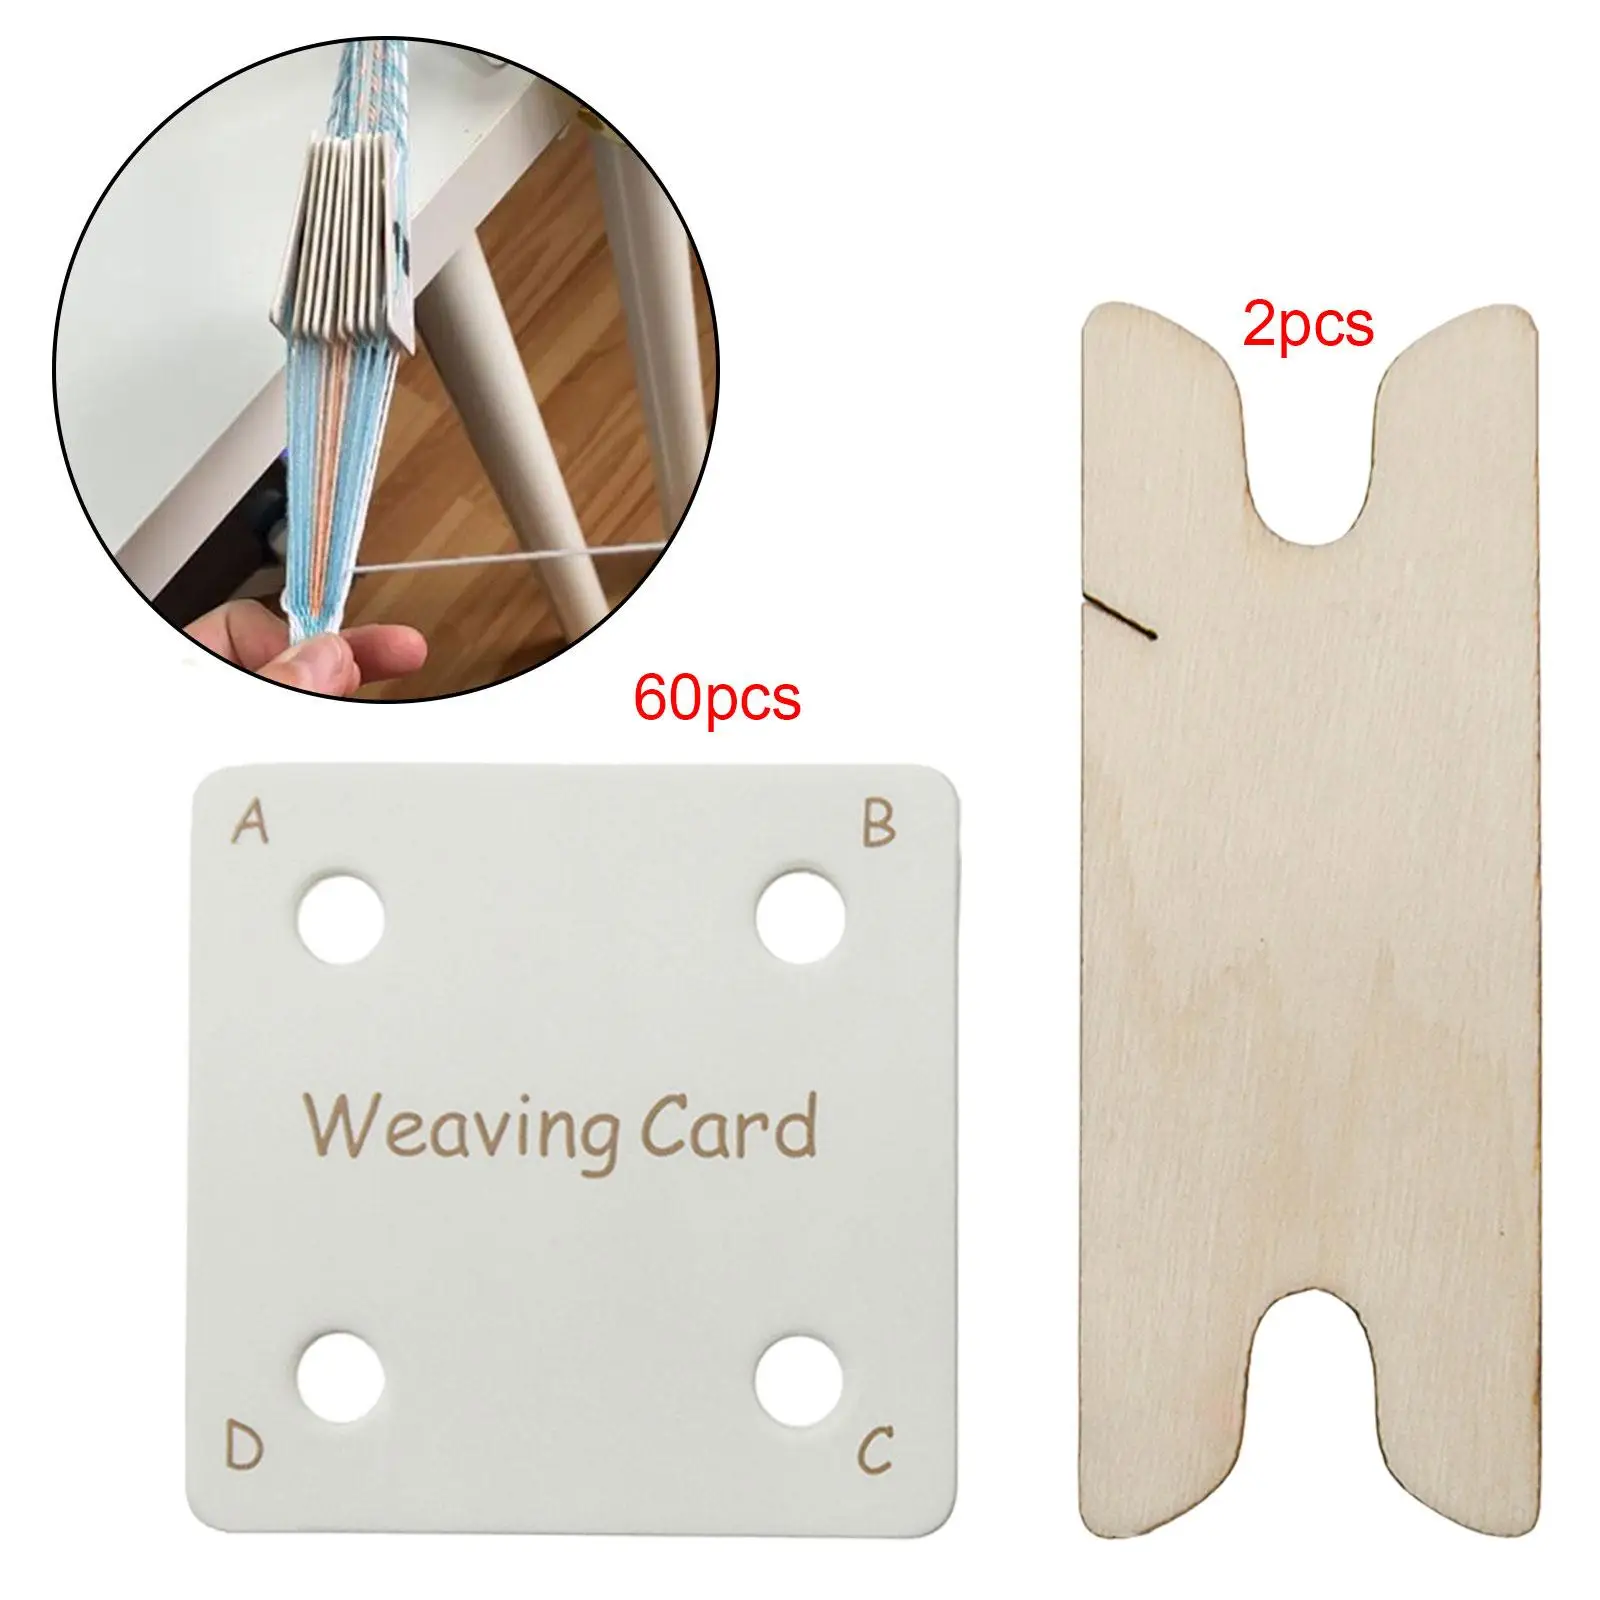 60x Tablet Weaving Card Sewing Accessories for Loom or Loom Scarf DIY Household Cross Stitch Beginners Paper Loom Cards